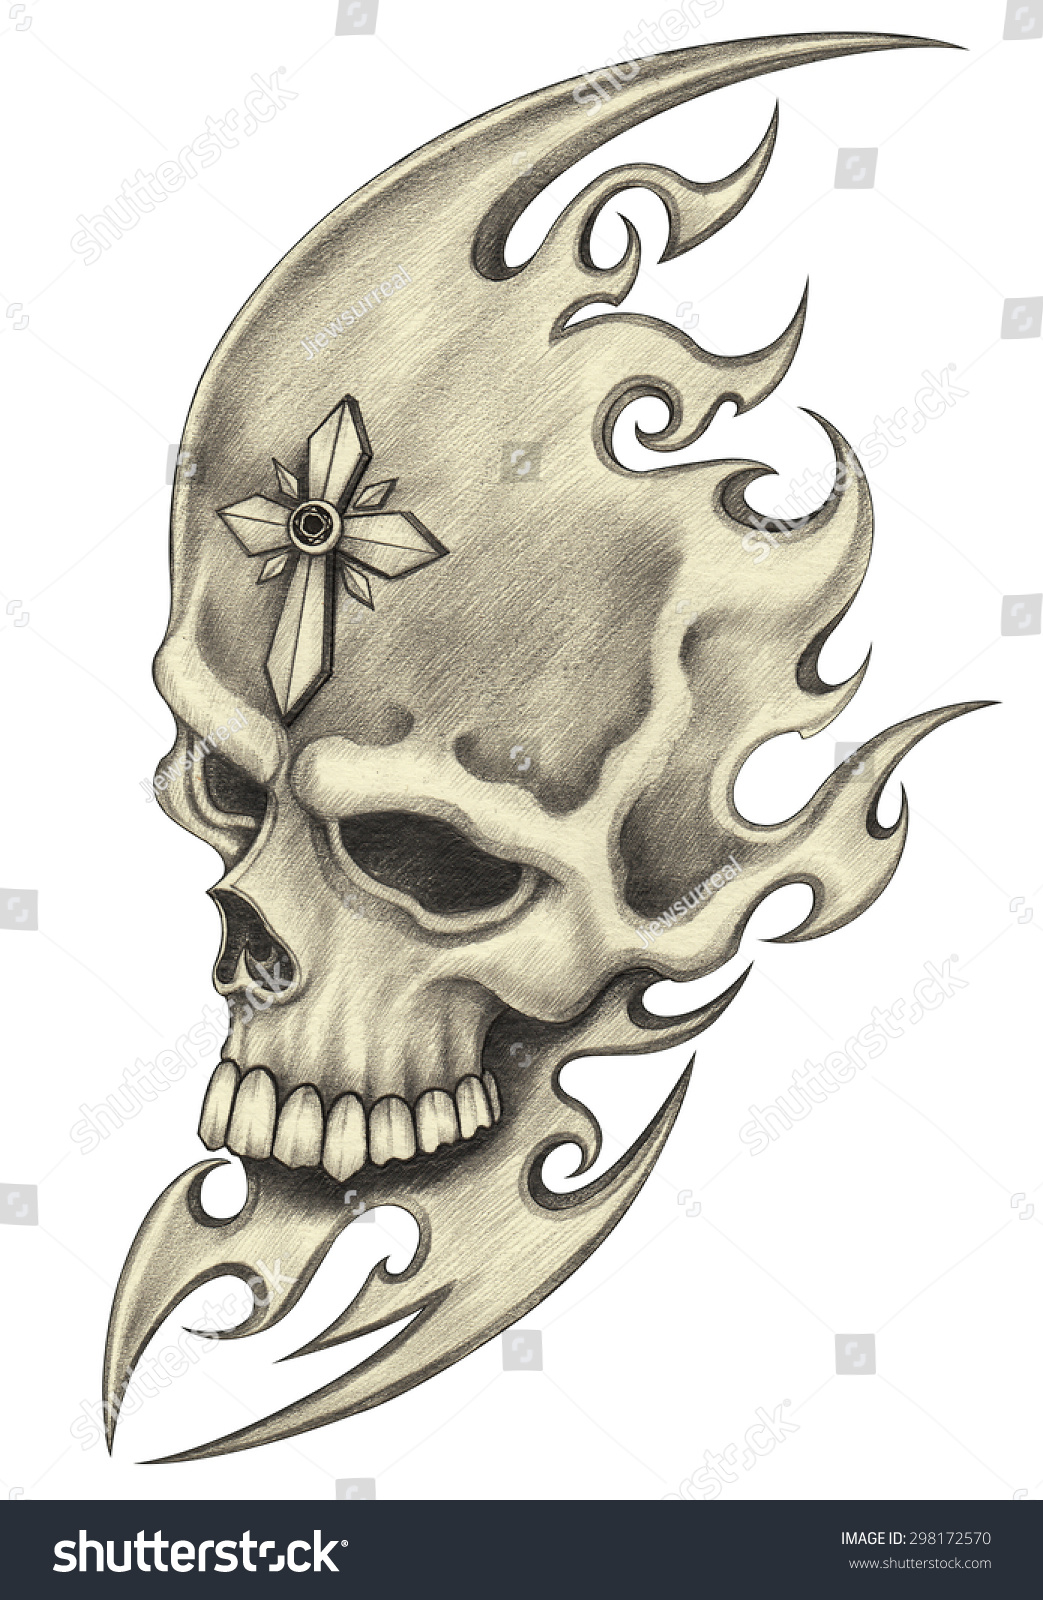 Skull Tattoo.Hand Pencil Drawing On Paper. Stock Photo 298172570 ...